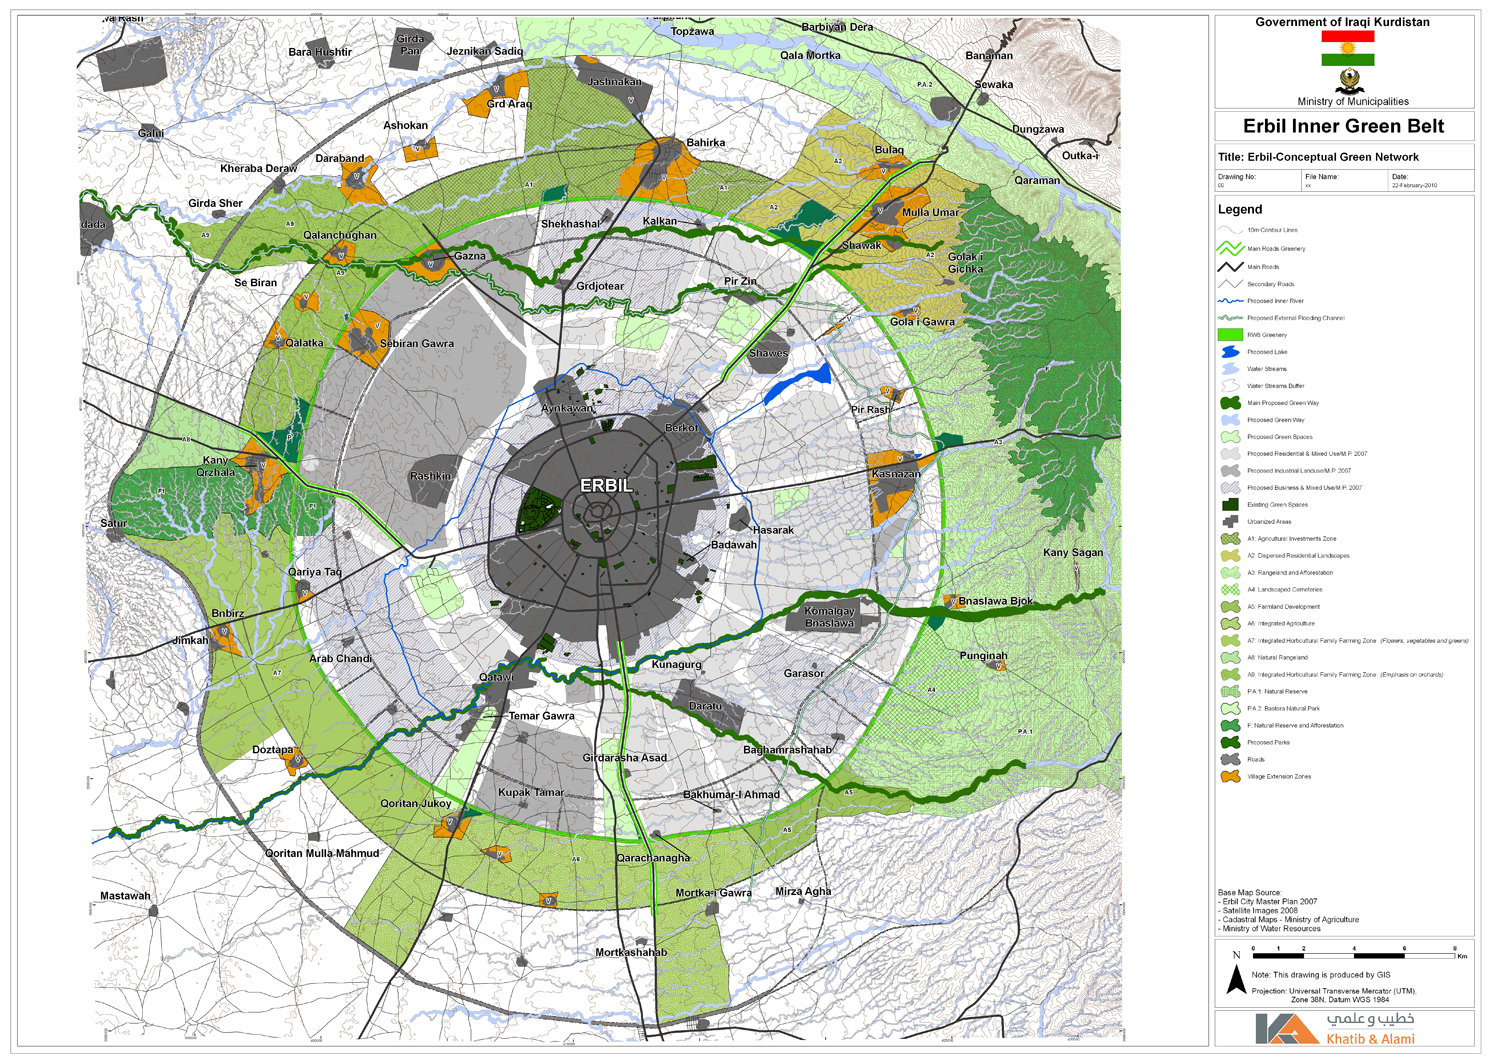 Master plan. Settlement built-up, Erbil in the center and surrounding villages (grey); forestation and natural landscapes (dark green); agricultural land (light green); ring road 8 (dark green inner circle)